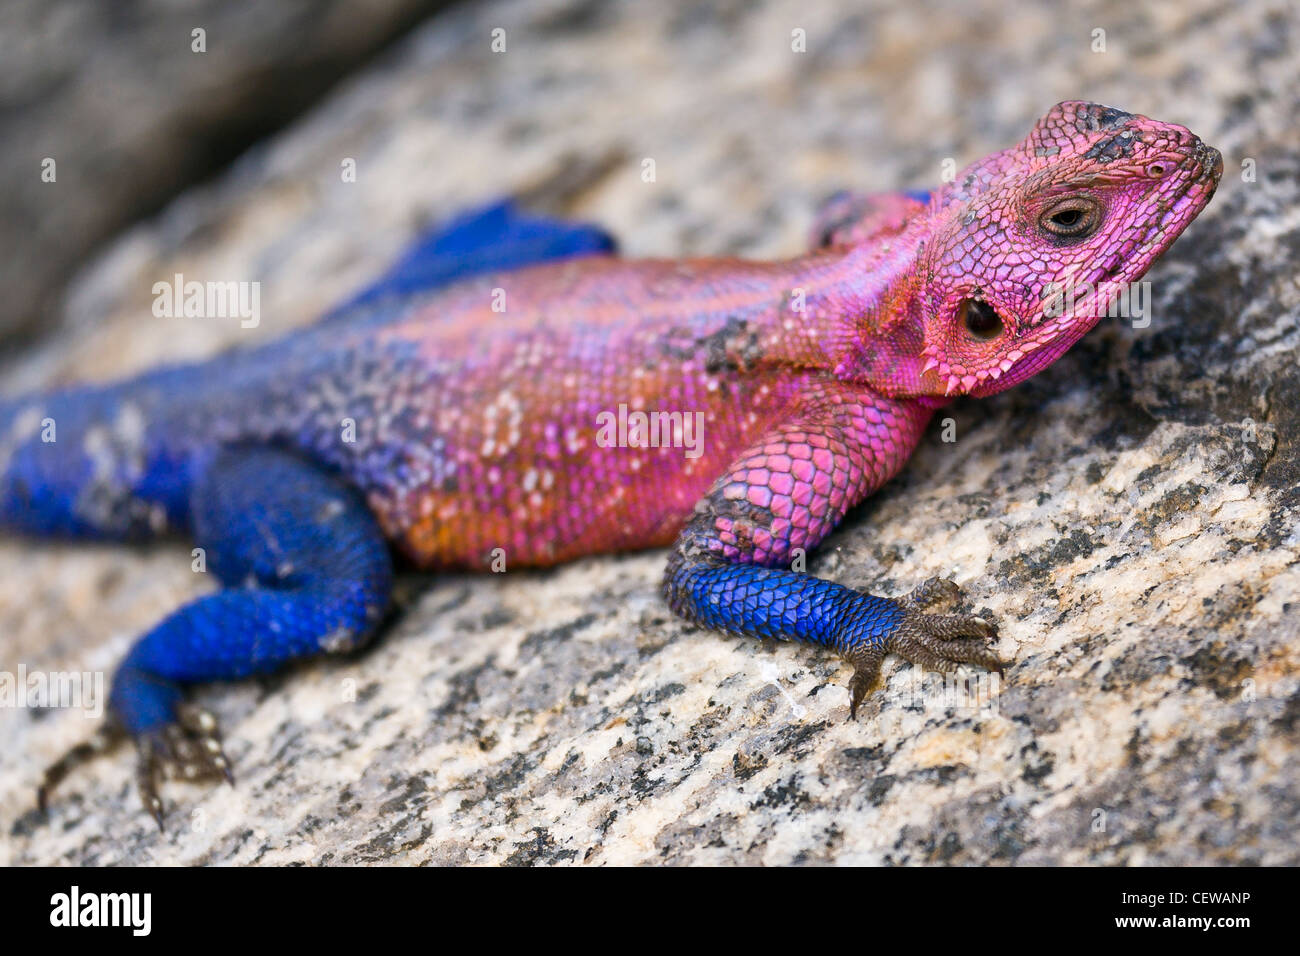 Red headed Agama lizard sunning on a rock. Stock Photo